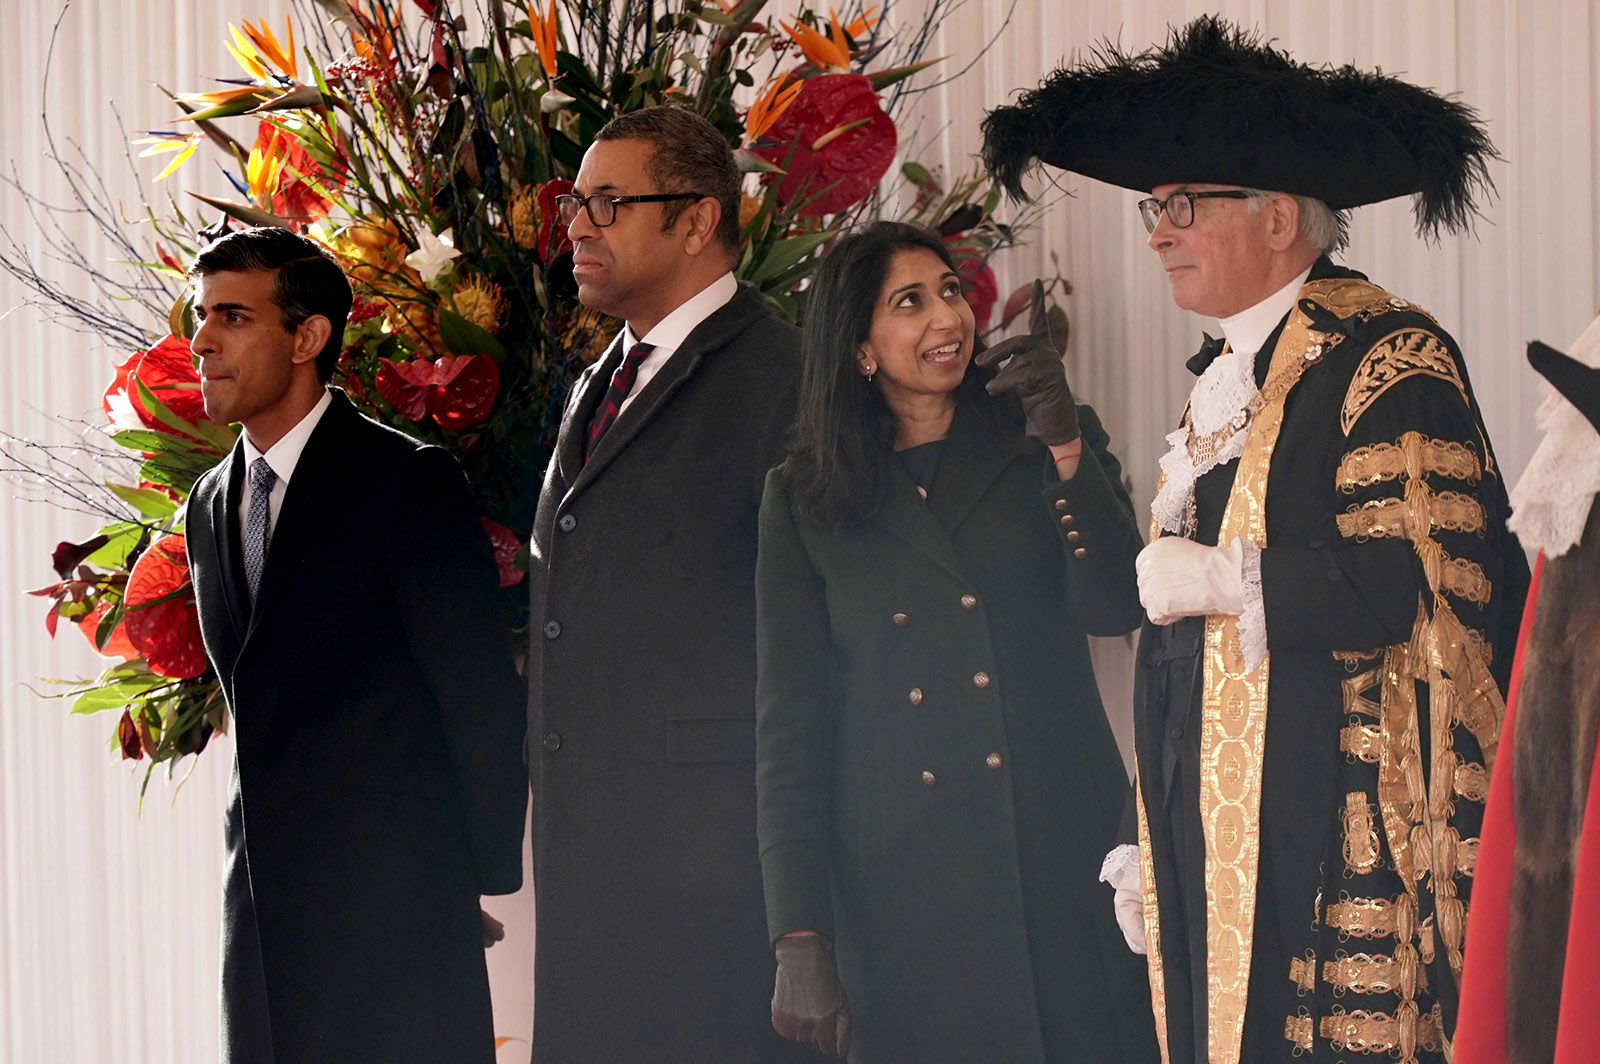 Prime Minister Rishi Sunak, Foreign Secretary James Cleverly, and Home Secretary Suella Braverman at the ceremonial welcome for visiting South African president Cyril Ramaphosa at Horse Guards Parade, London